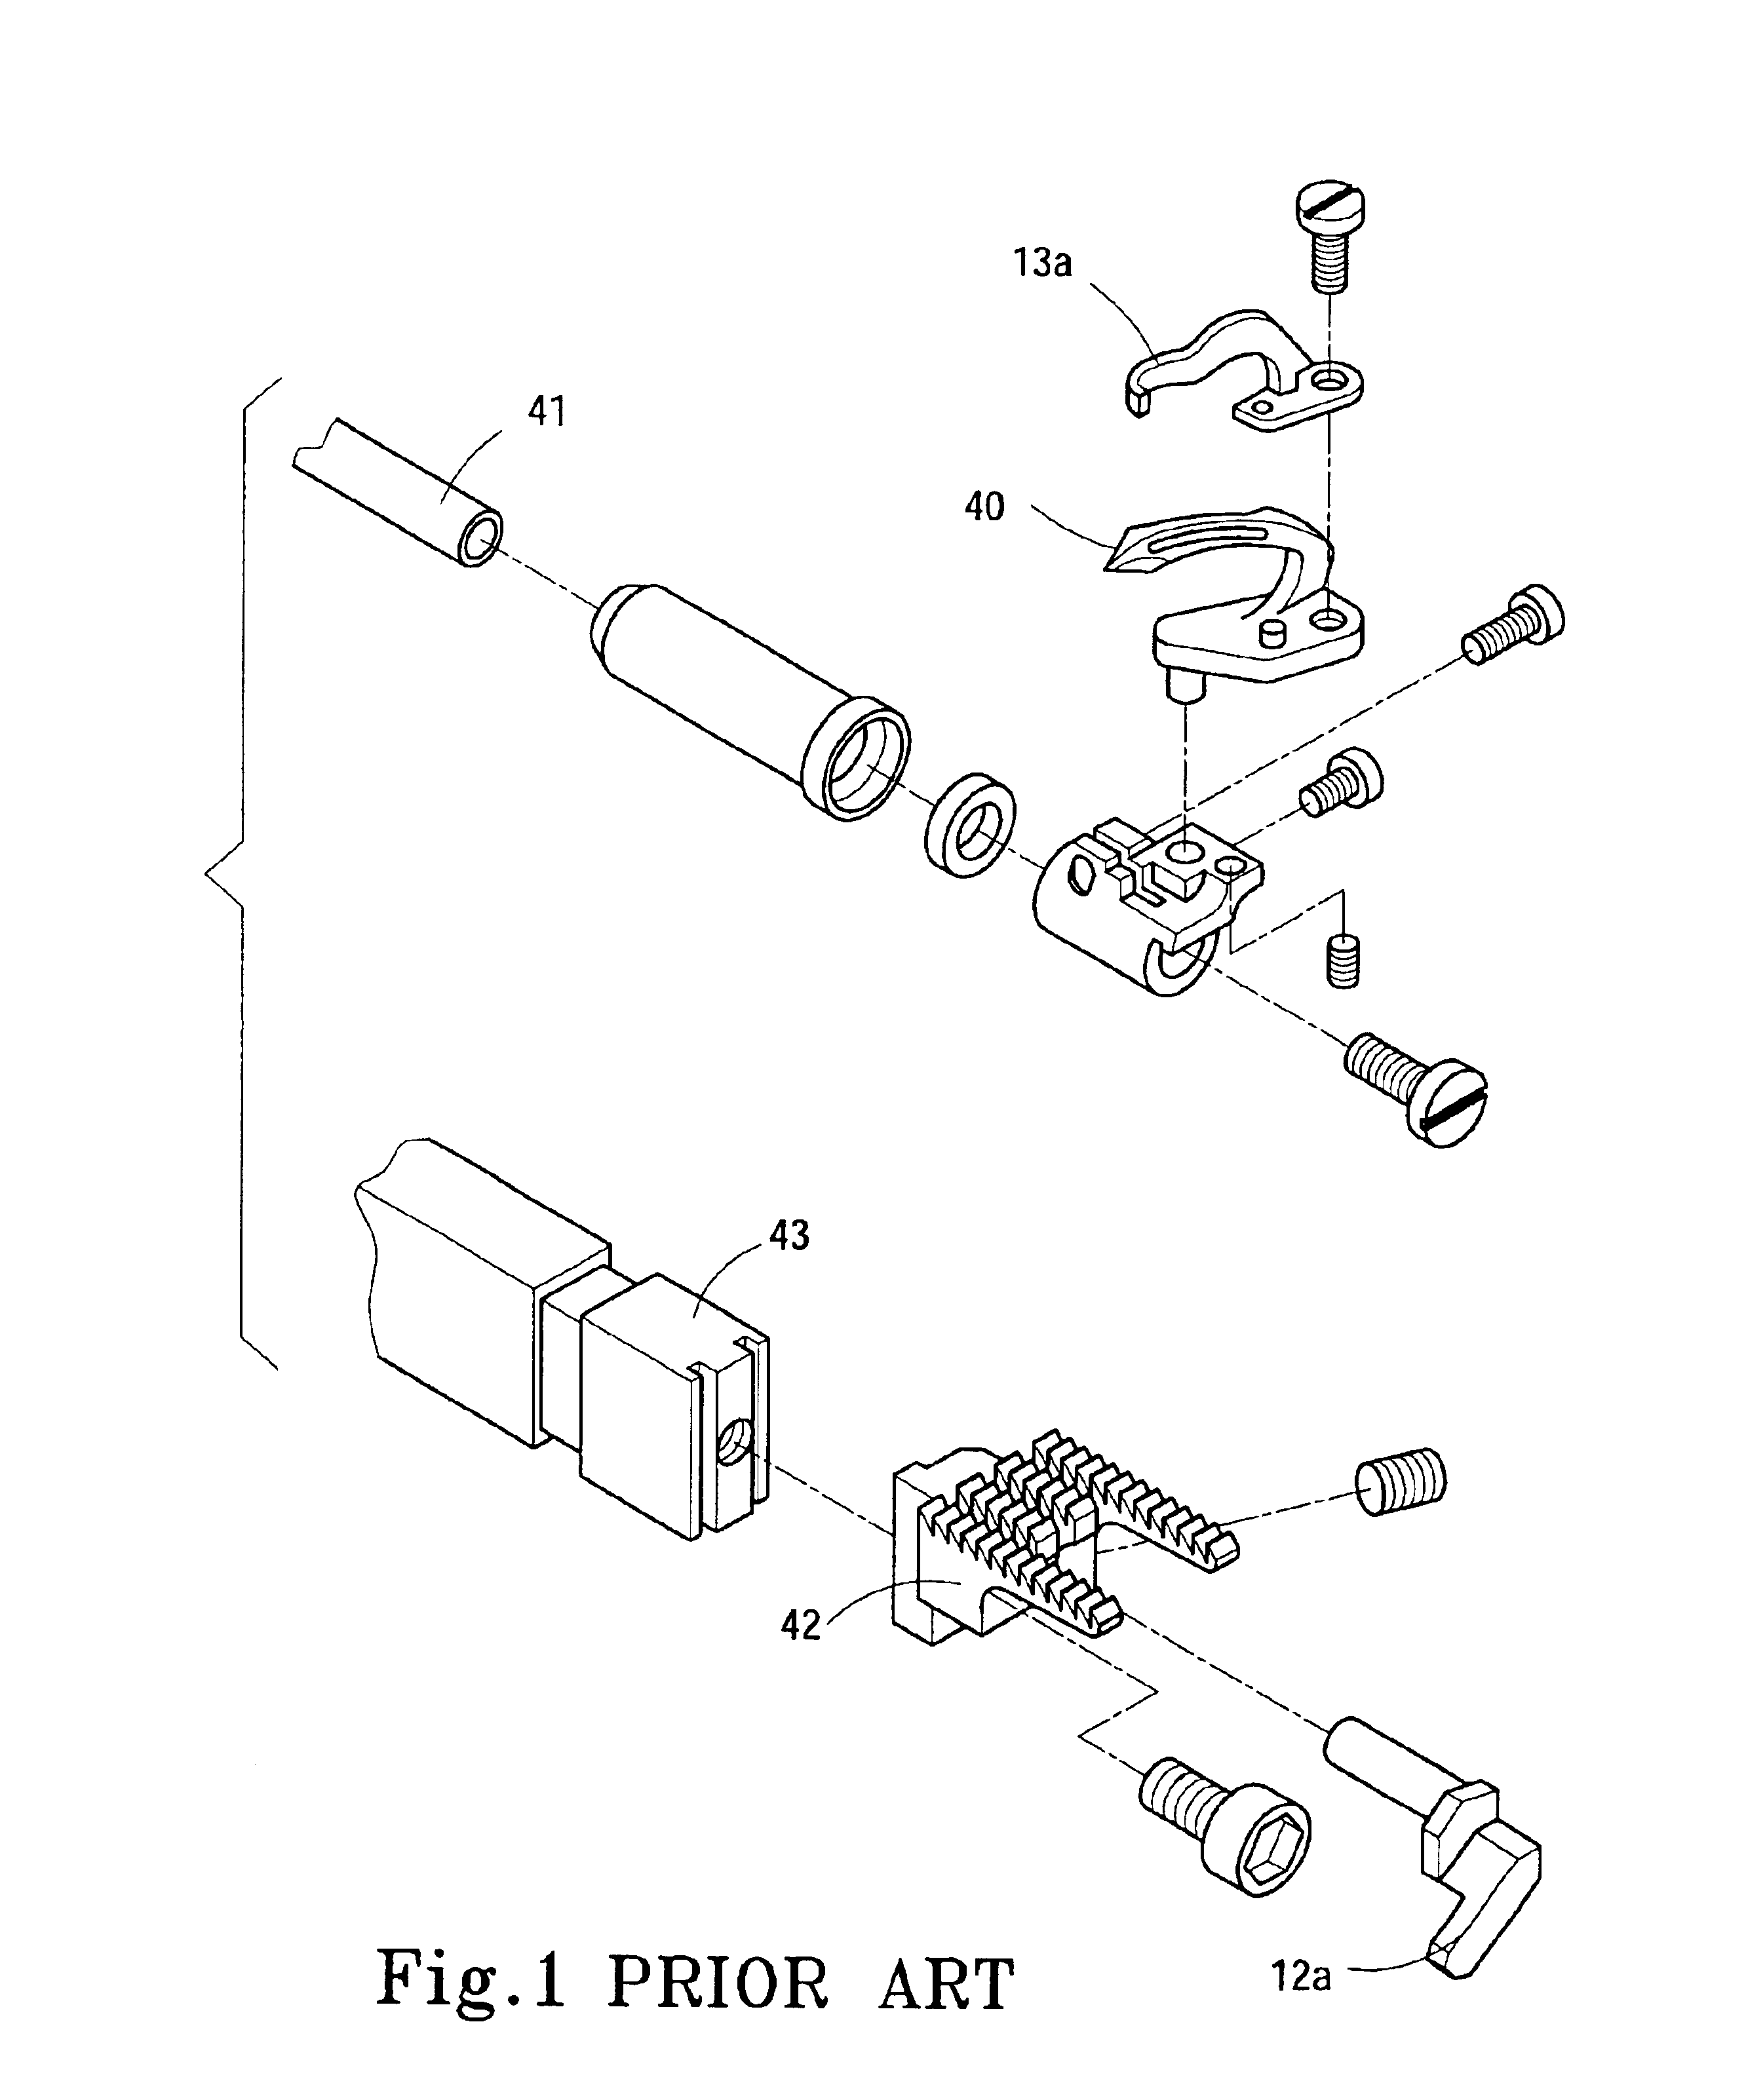 Needle guard mechanism for sewing machines